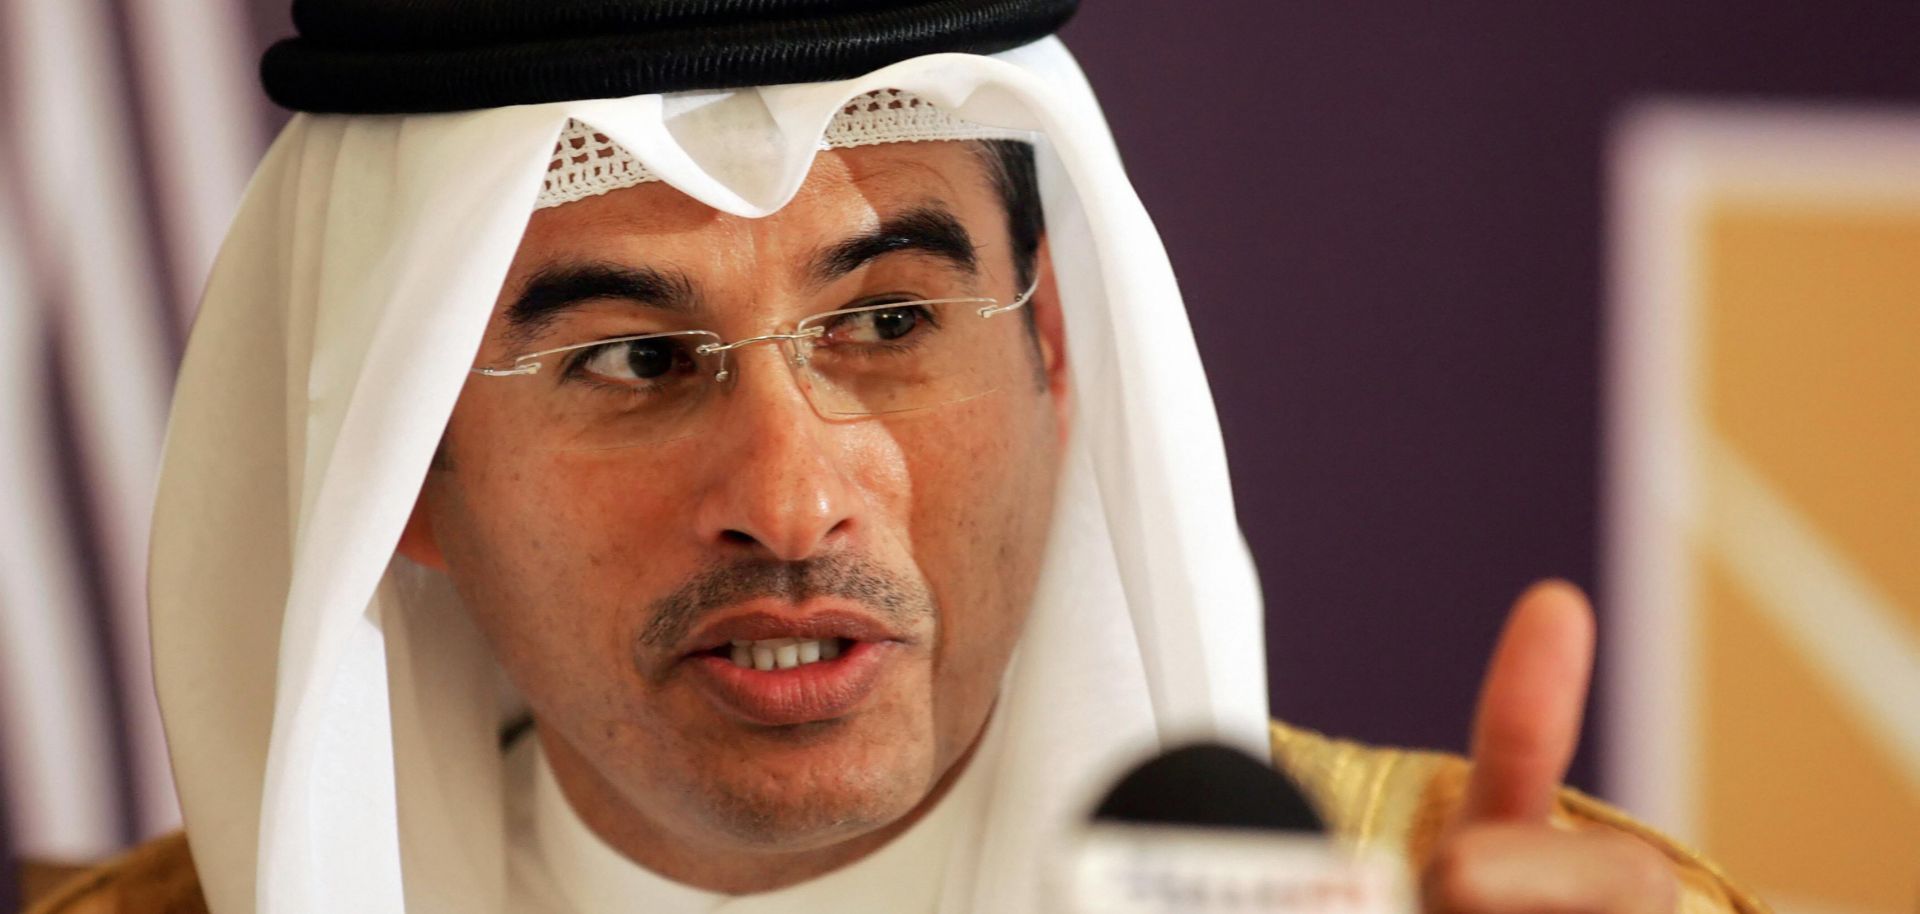 The chairman of Dubai's Holding and Emirates real estate company Emaar, Mohamed Ali Alabbar, speaks during a press conference in Riyadh.